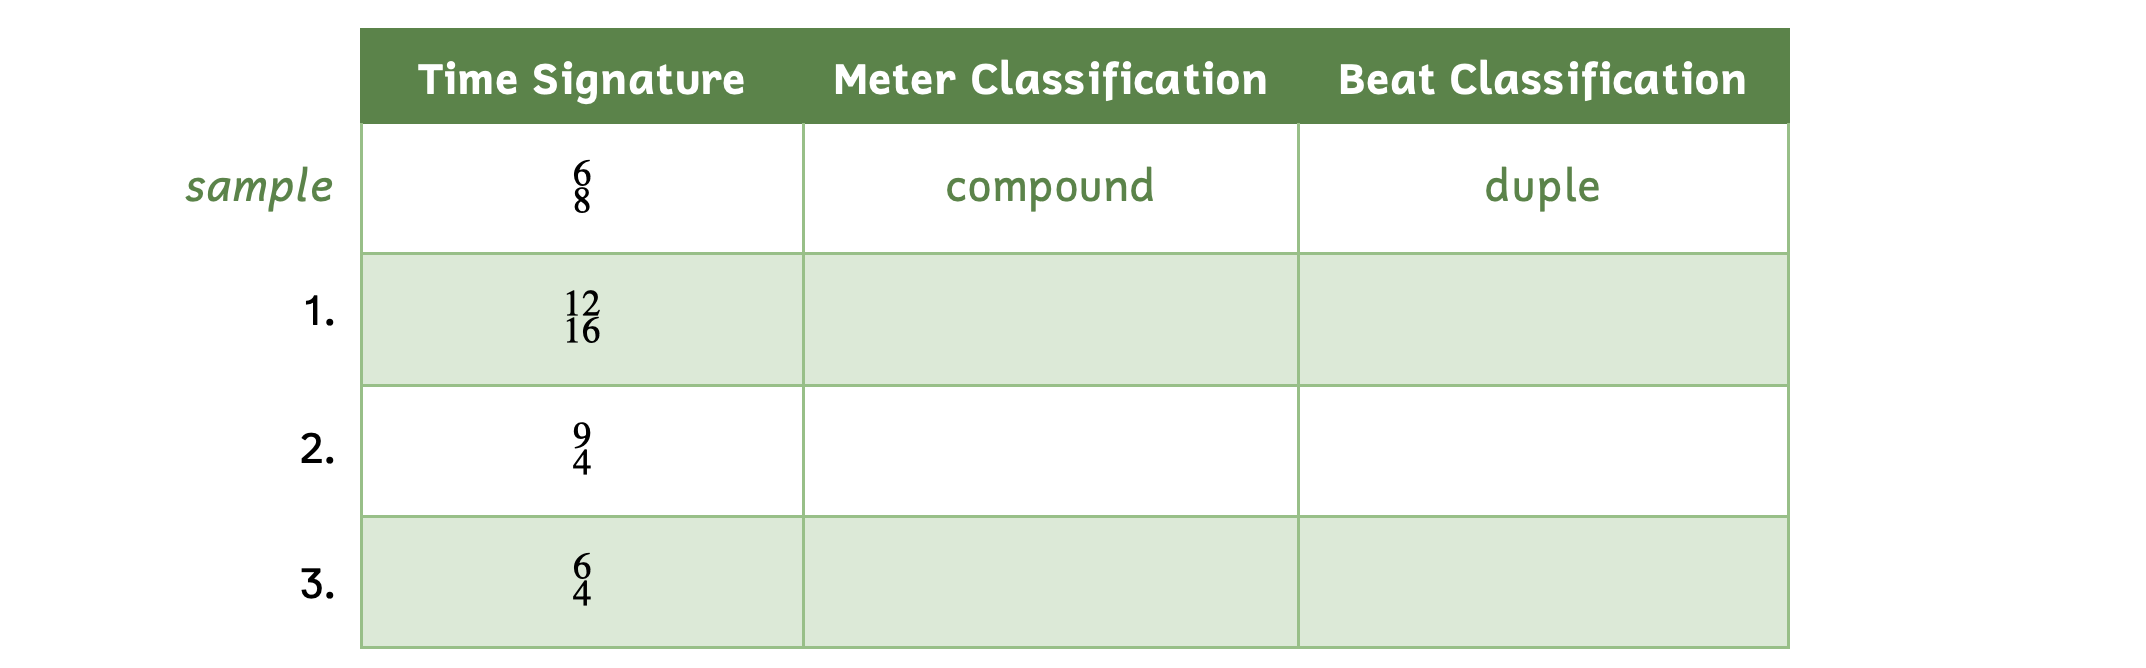 The first column lists the time signature. The second column asks for the meter classification. The second column asks for the beat classification. The sample is the time signature 6-8. Its meter classification is compound and its beat classification is duple. Number 1 is 12-16. Number 2 is 9-4. Number 3 is 6-4.